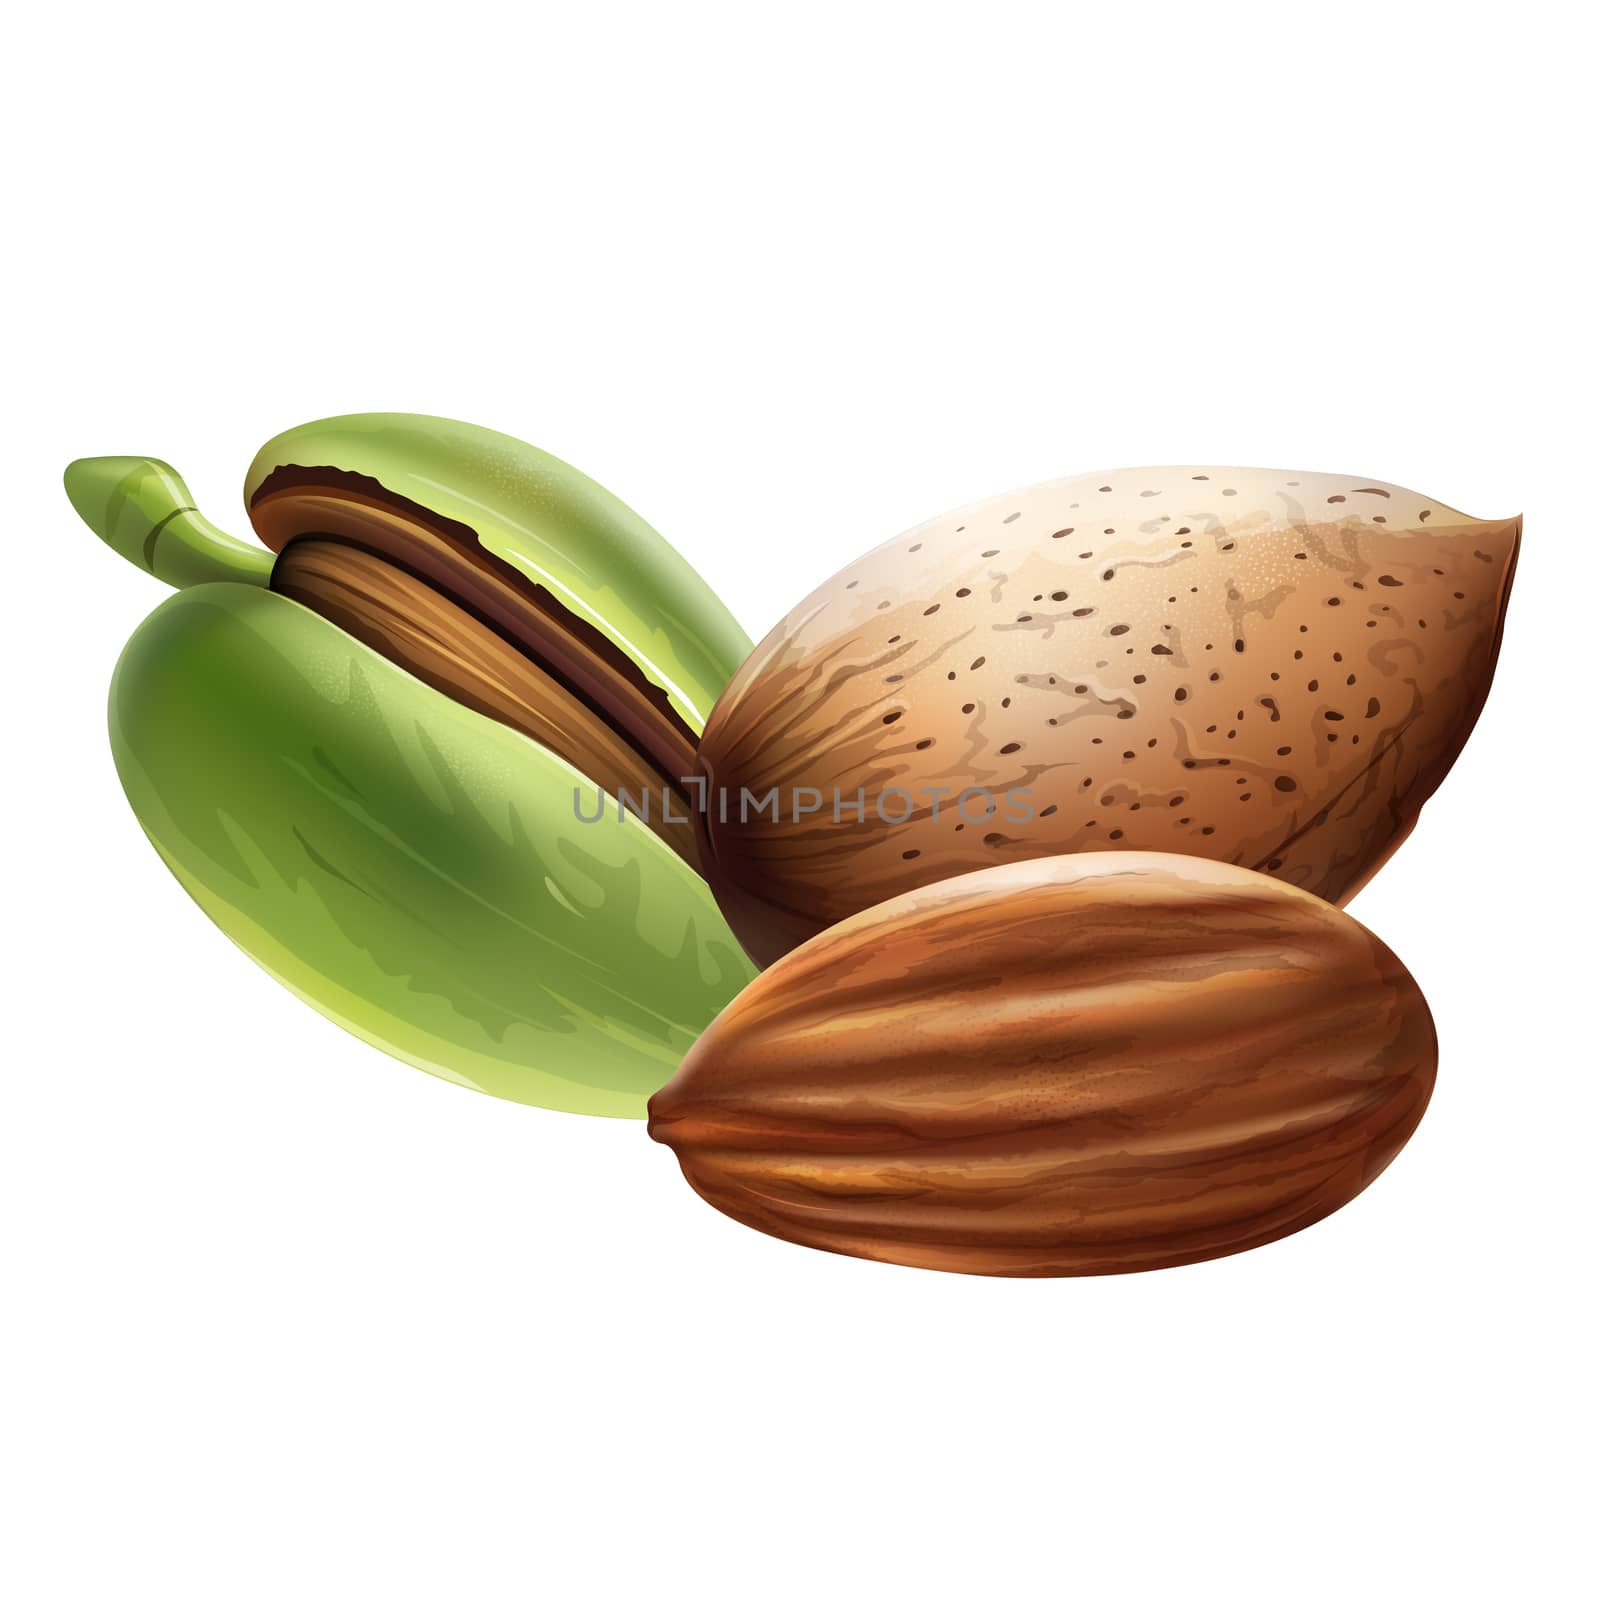 Almond on white background by ConceptCafe